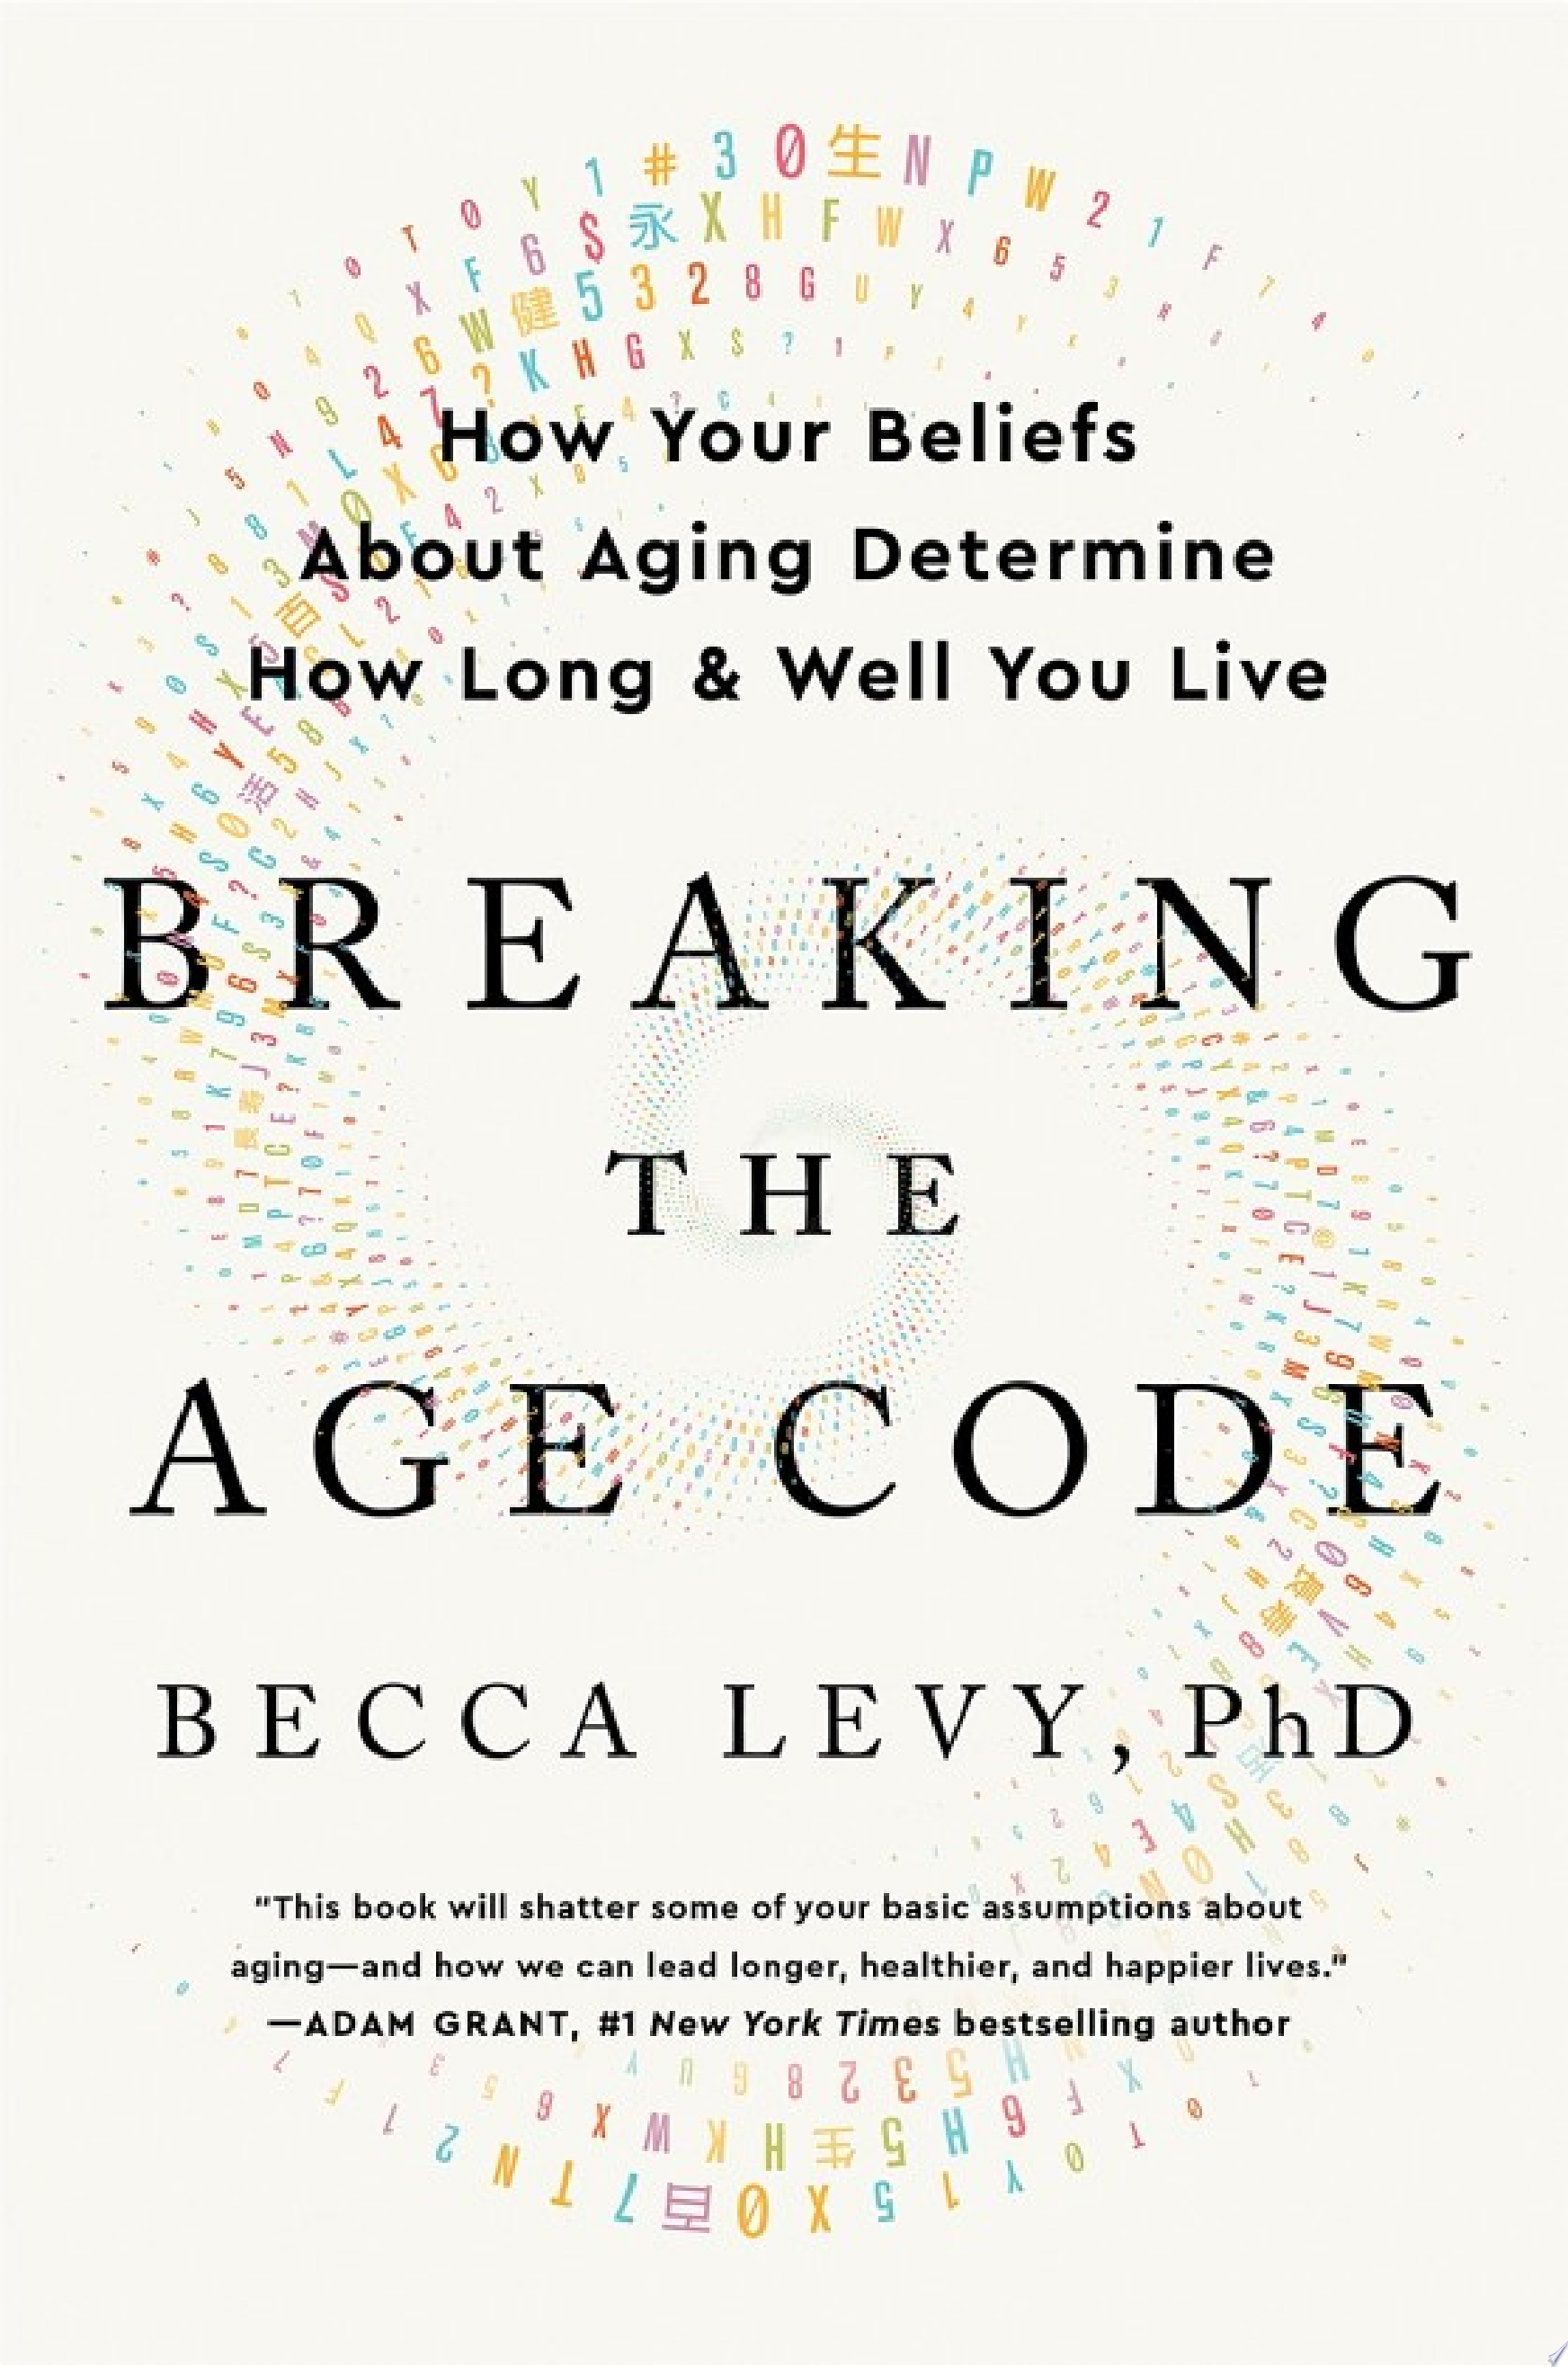 Image for "Breaking the Age Code"